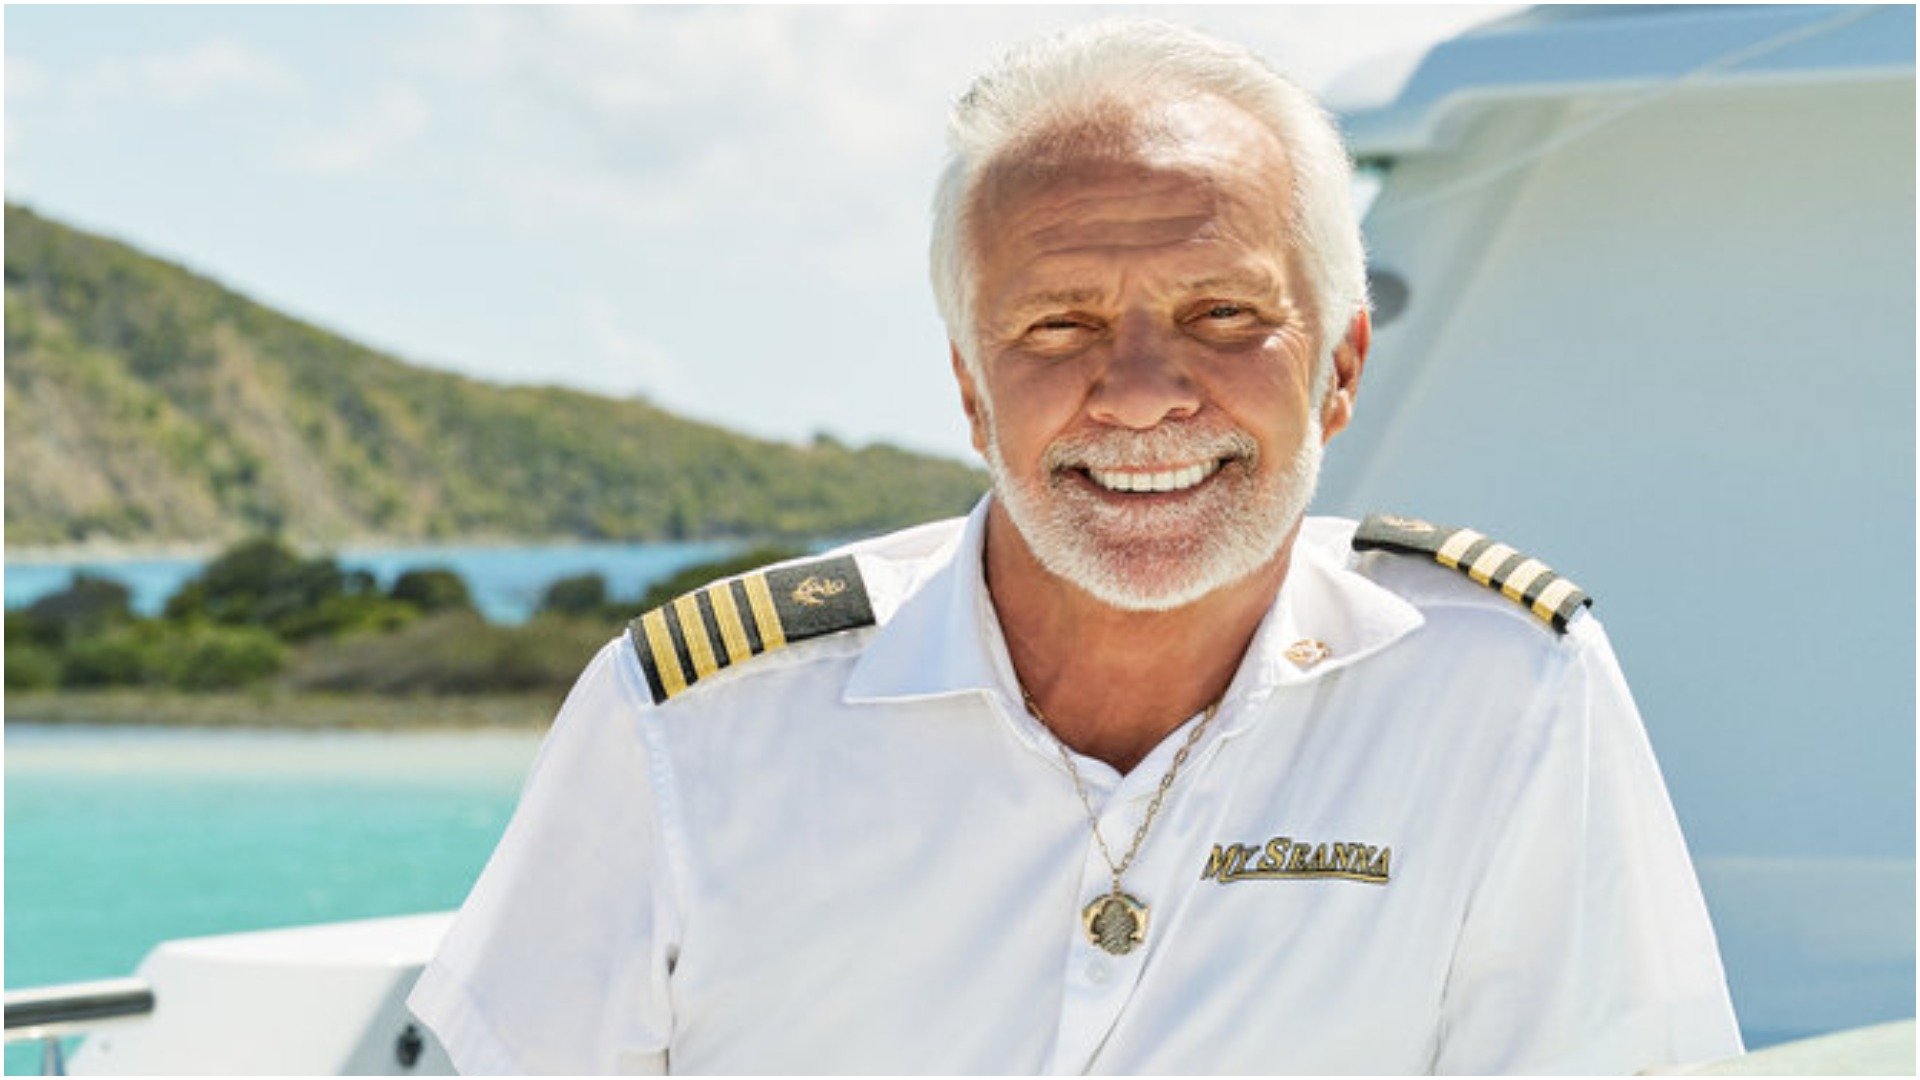 The Below Deck Season 9 charter guests said Captain Lee Rosbach and crew made it a trip of a lifetime